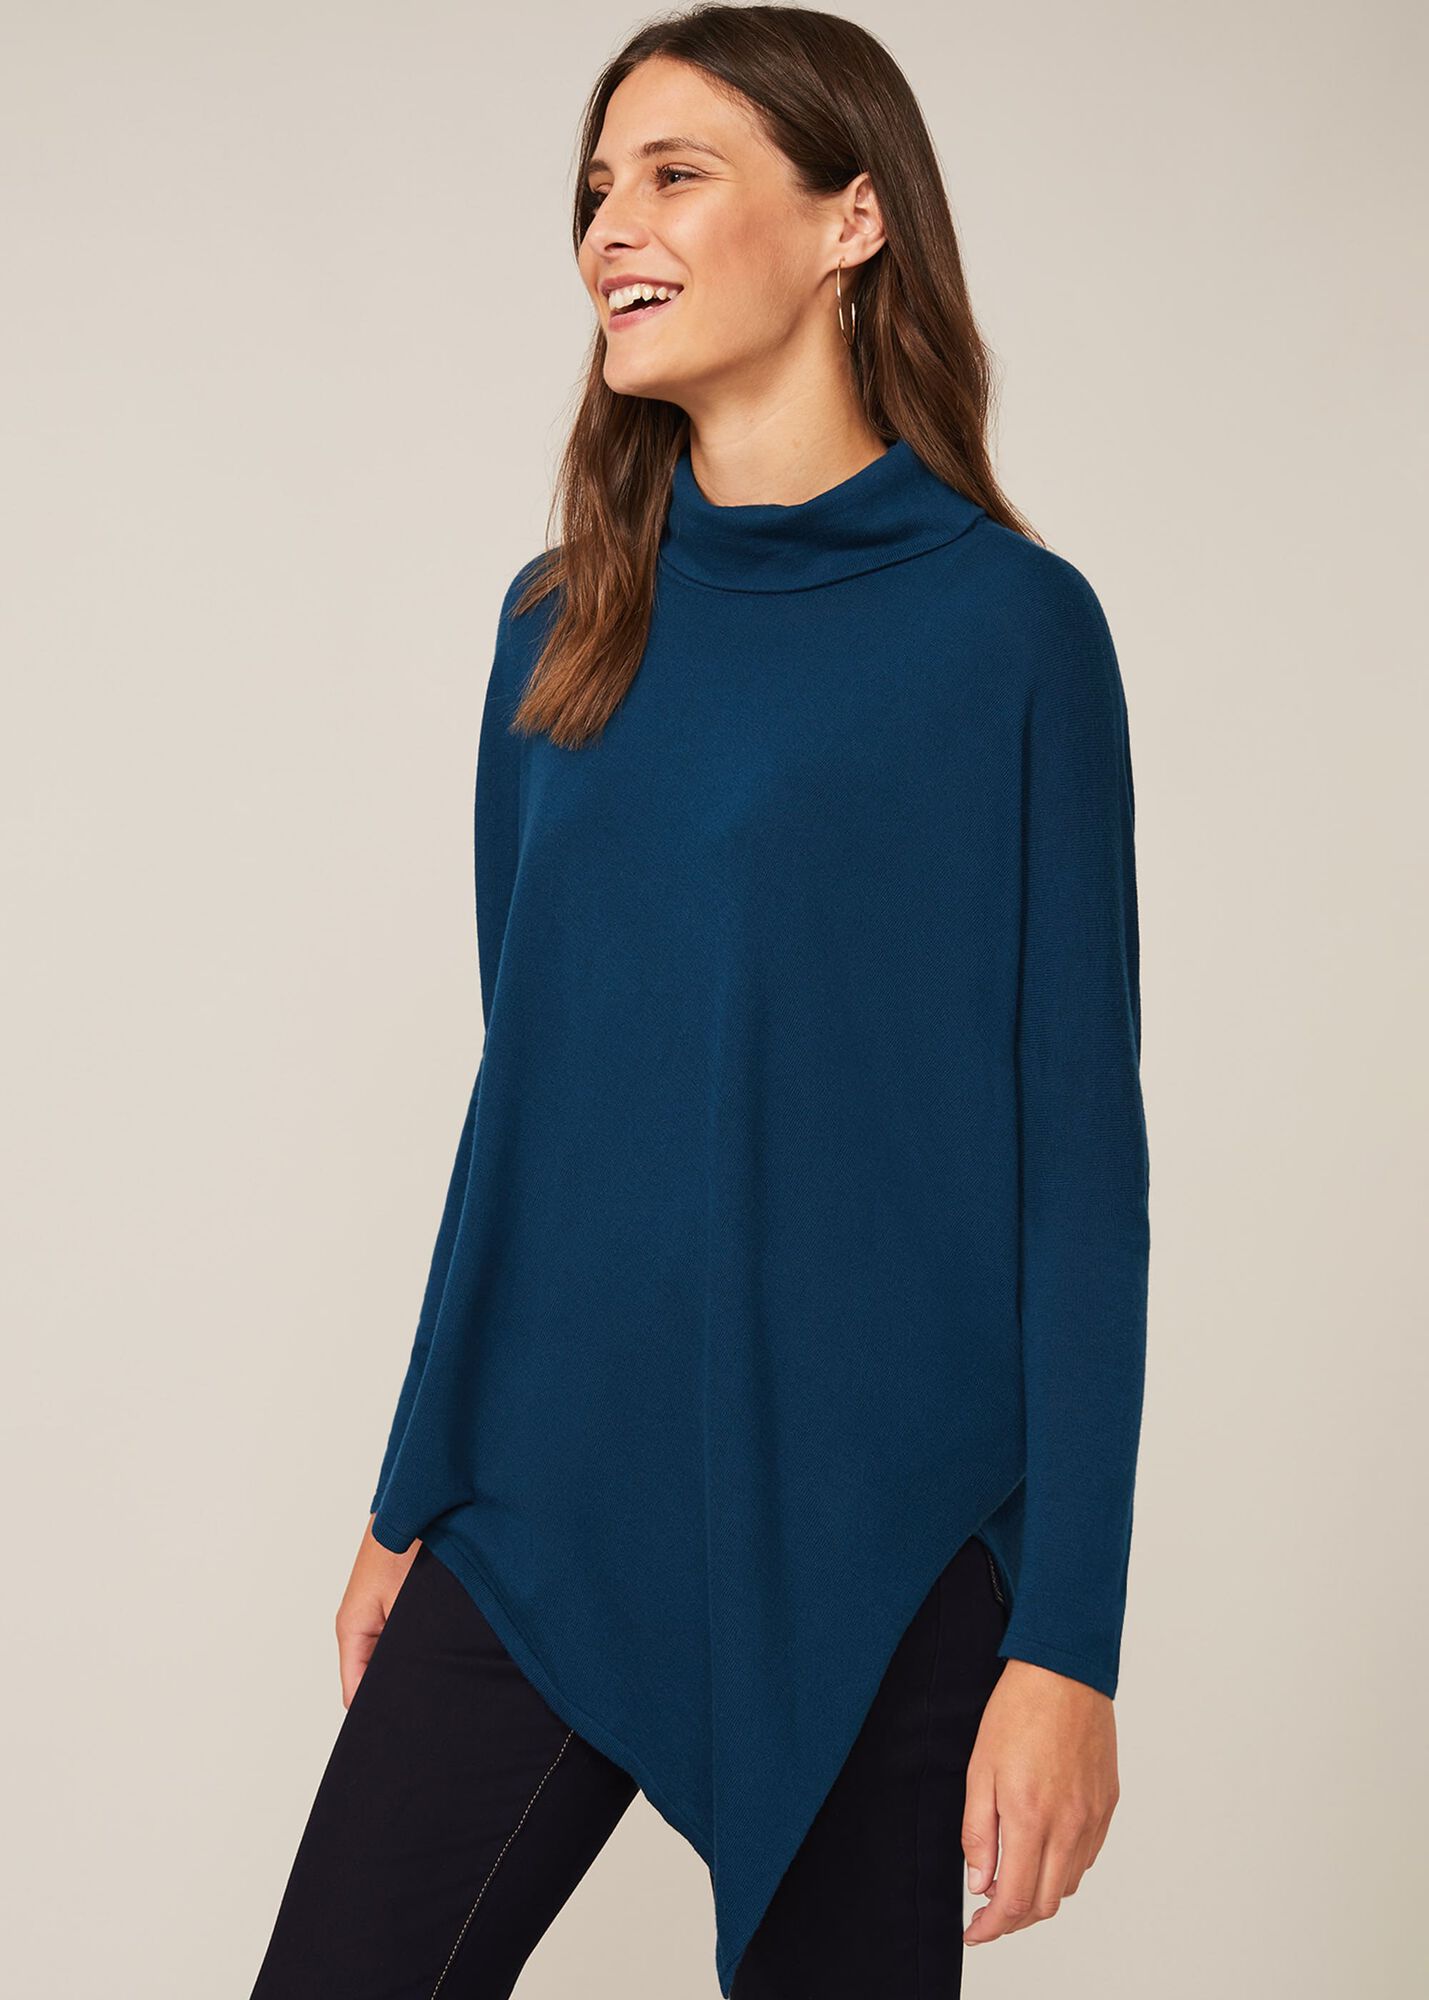 Melinda Cowl Neck Knit Top | Phase Eight